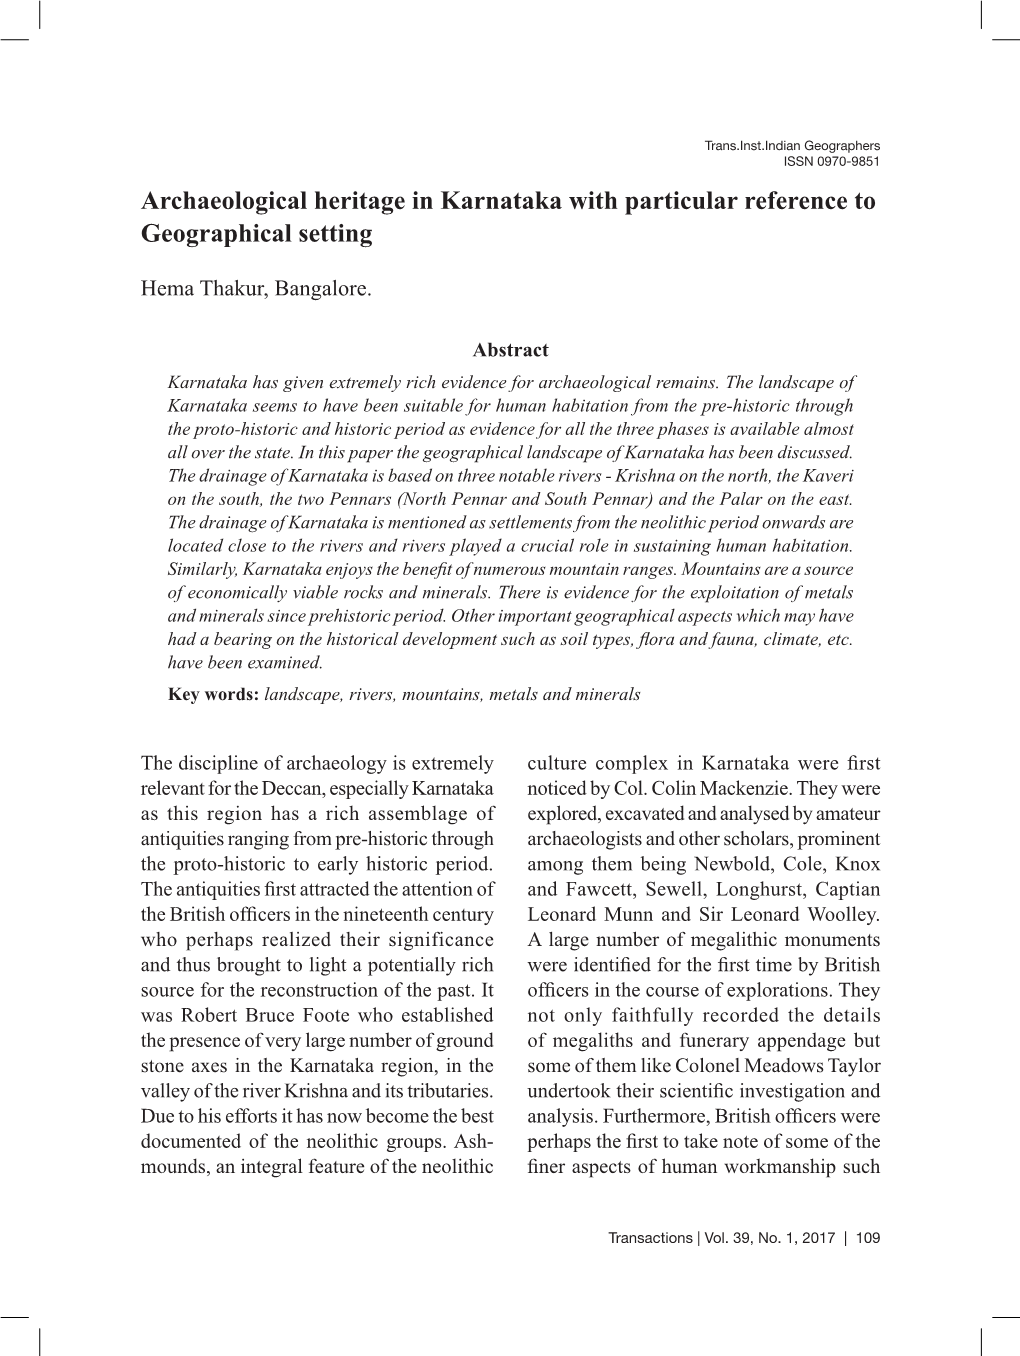 Archaeological Heritage in Karnataka with Particular Reference to Geographical Setting